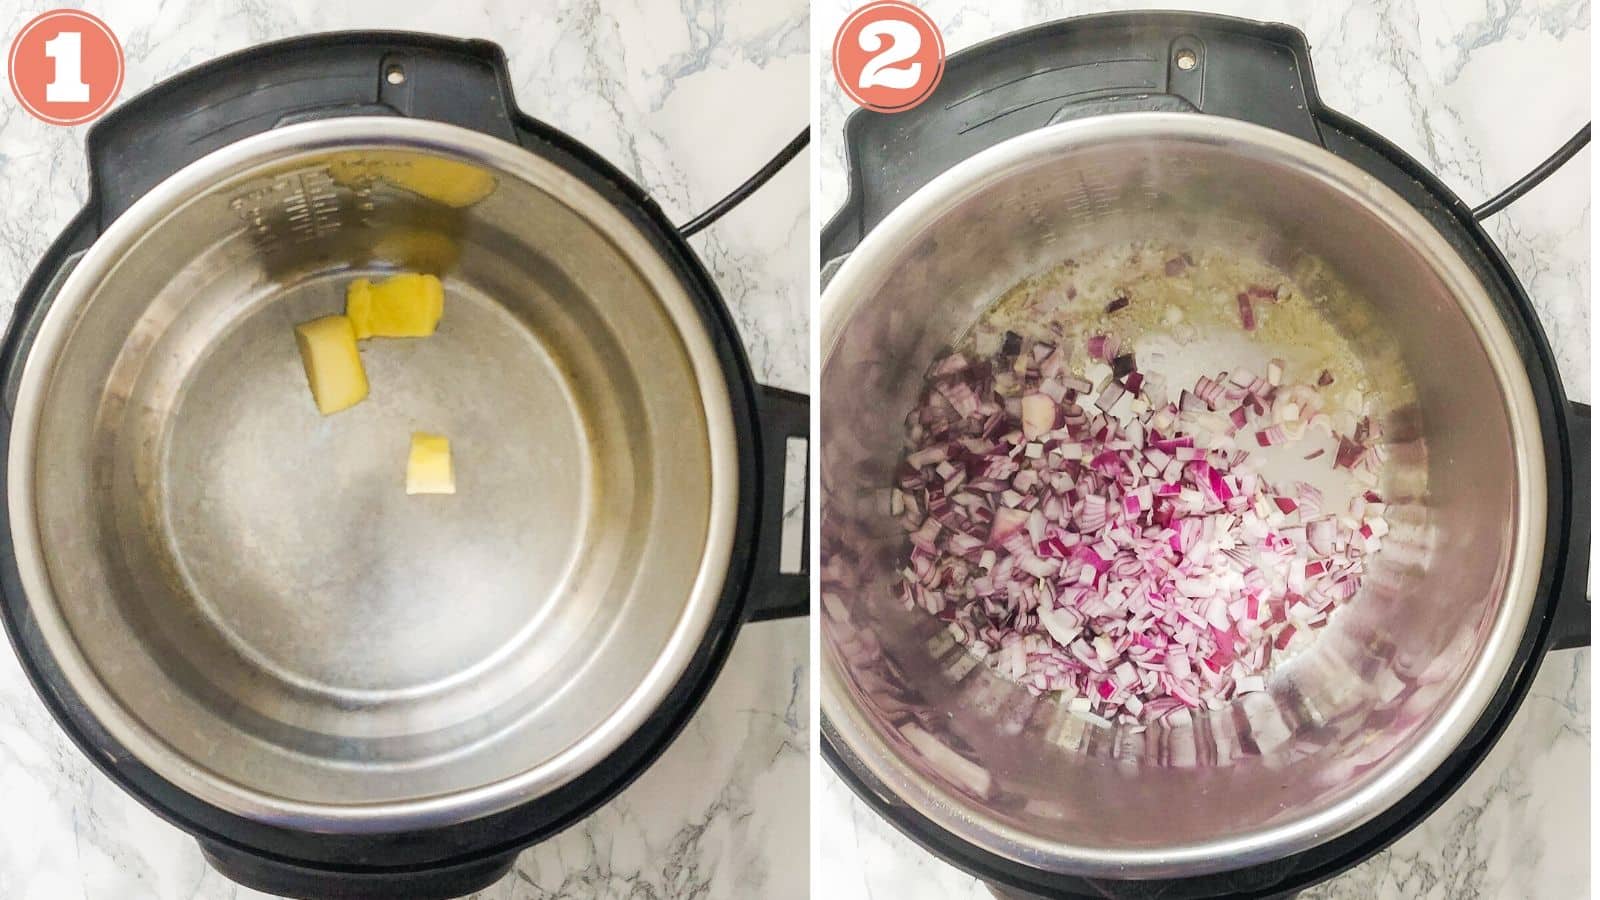 Heating butter and onions in the Instant Pot 